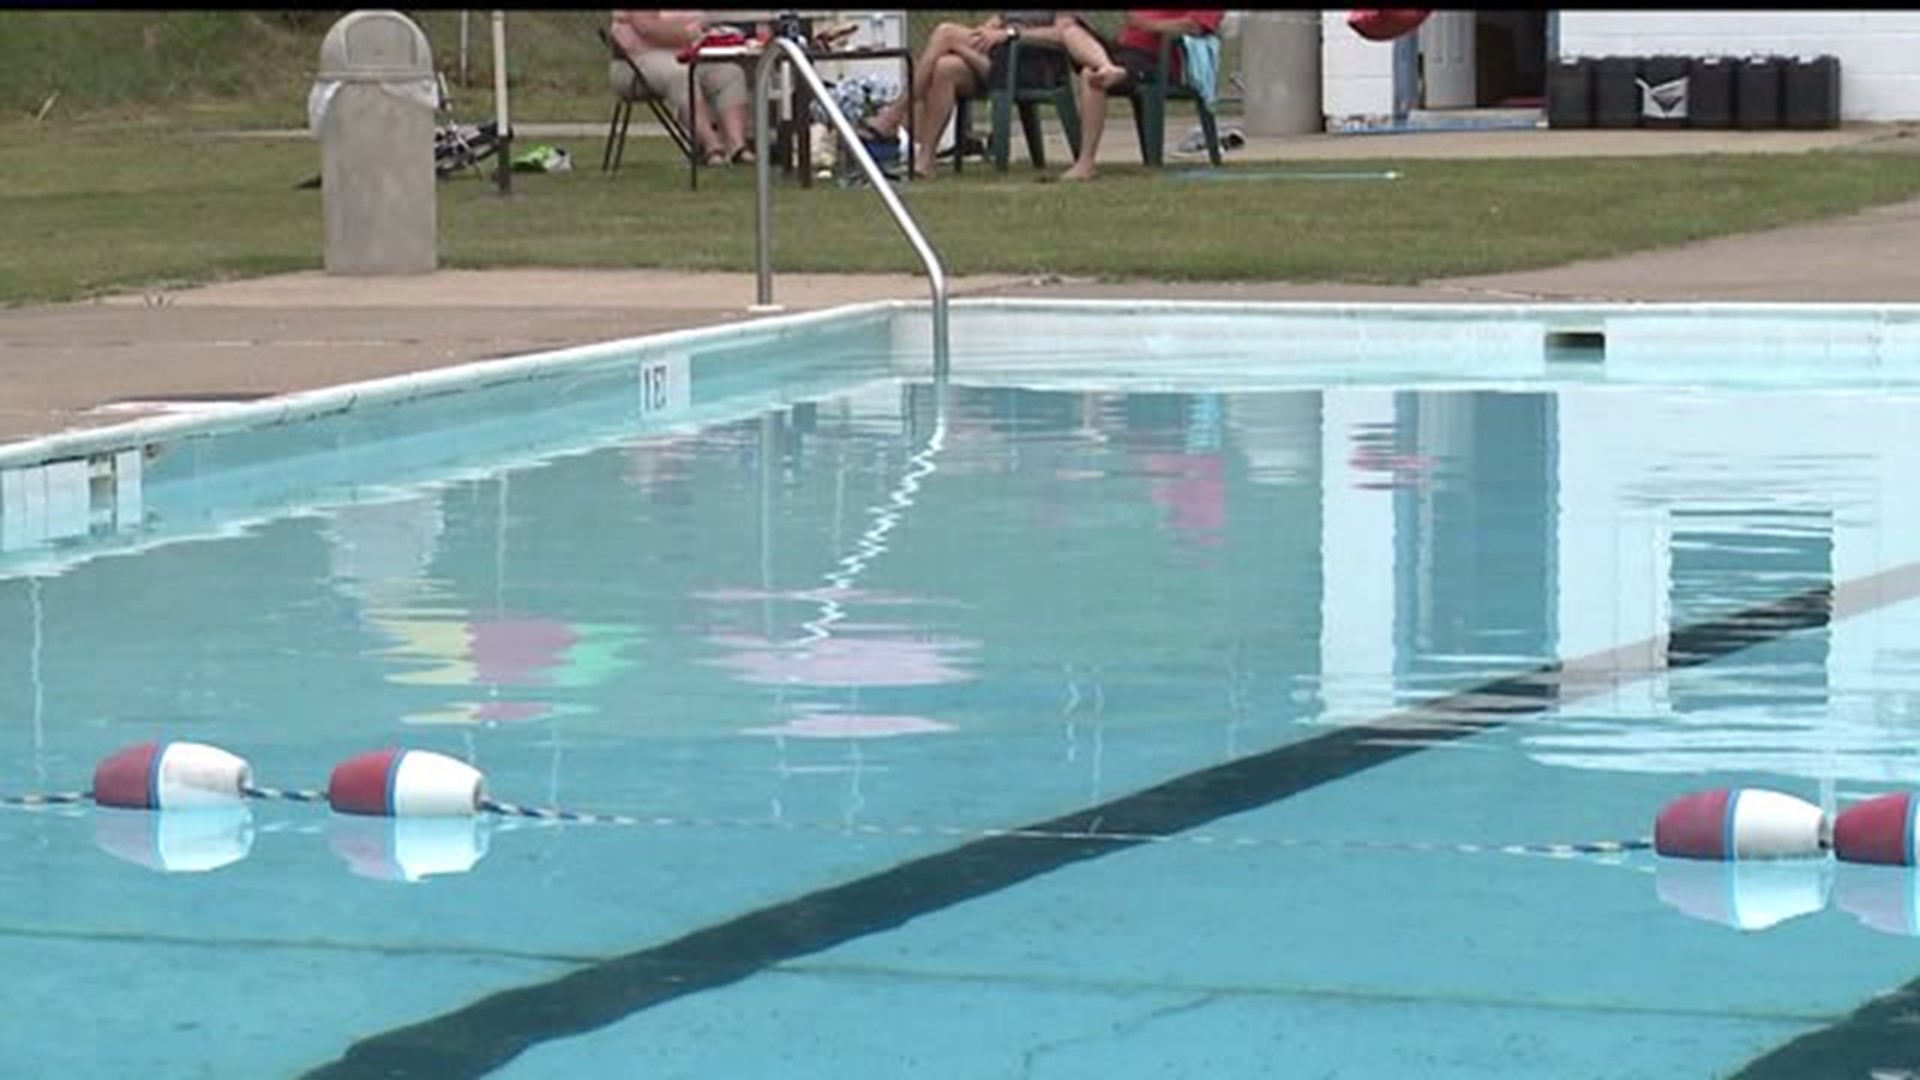 Dauphin County pool reopens, but may close again